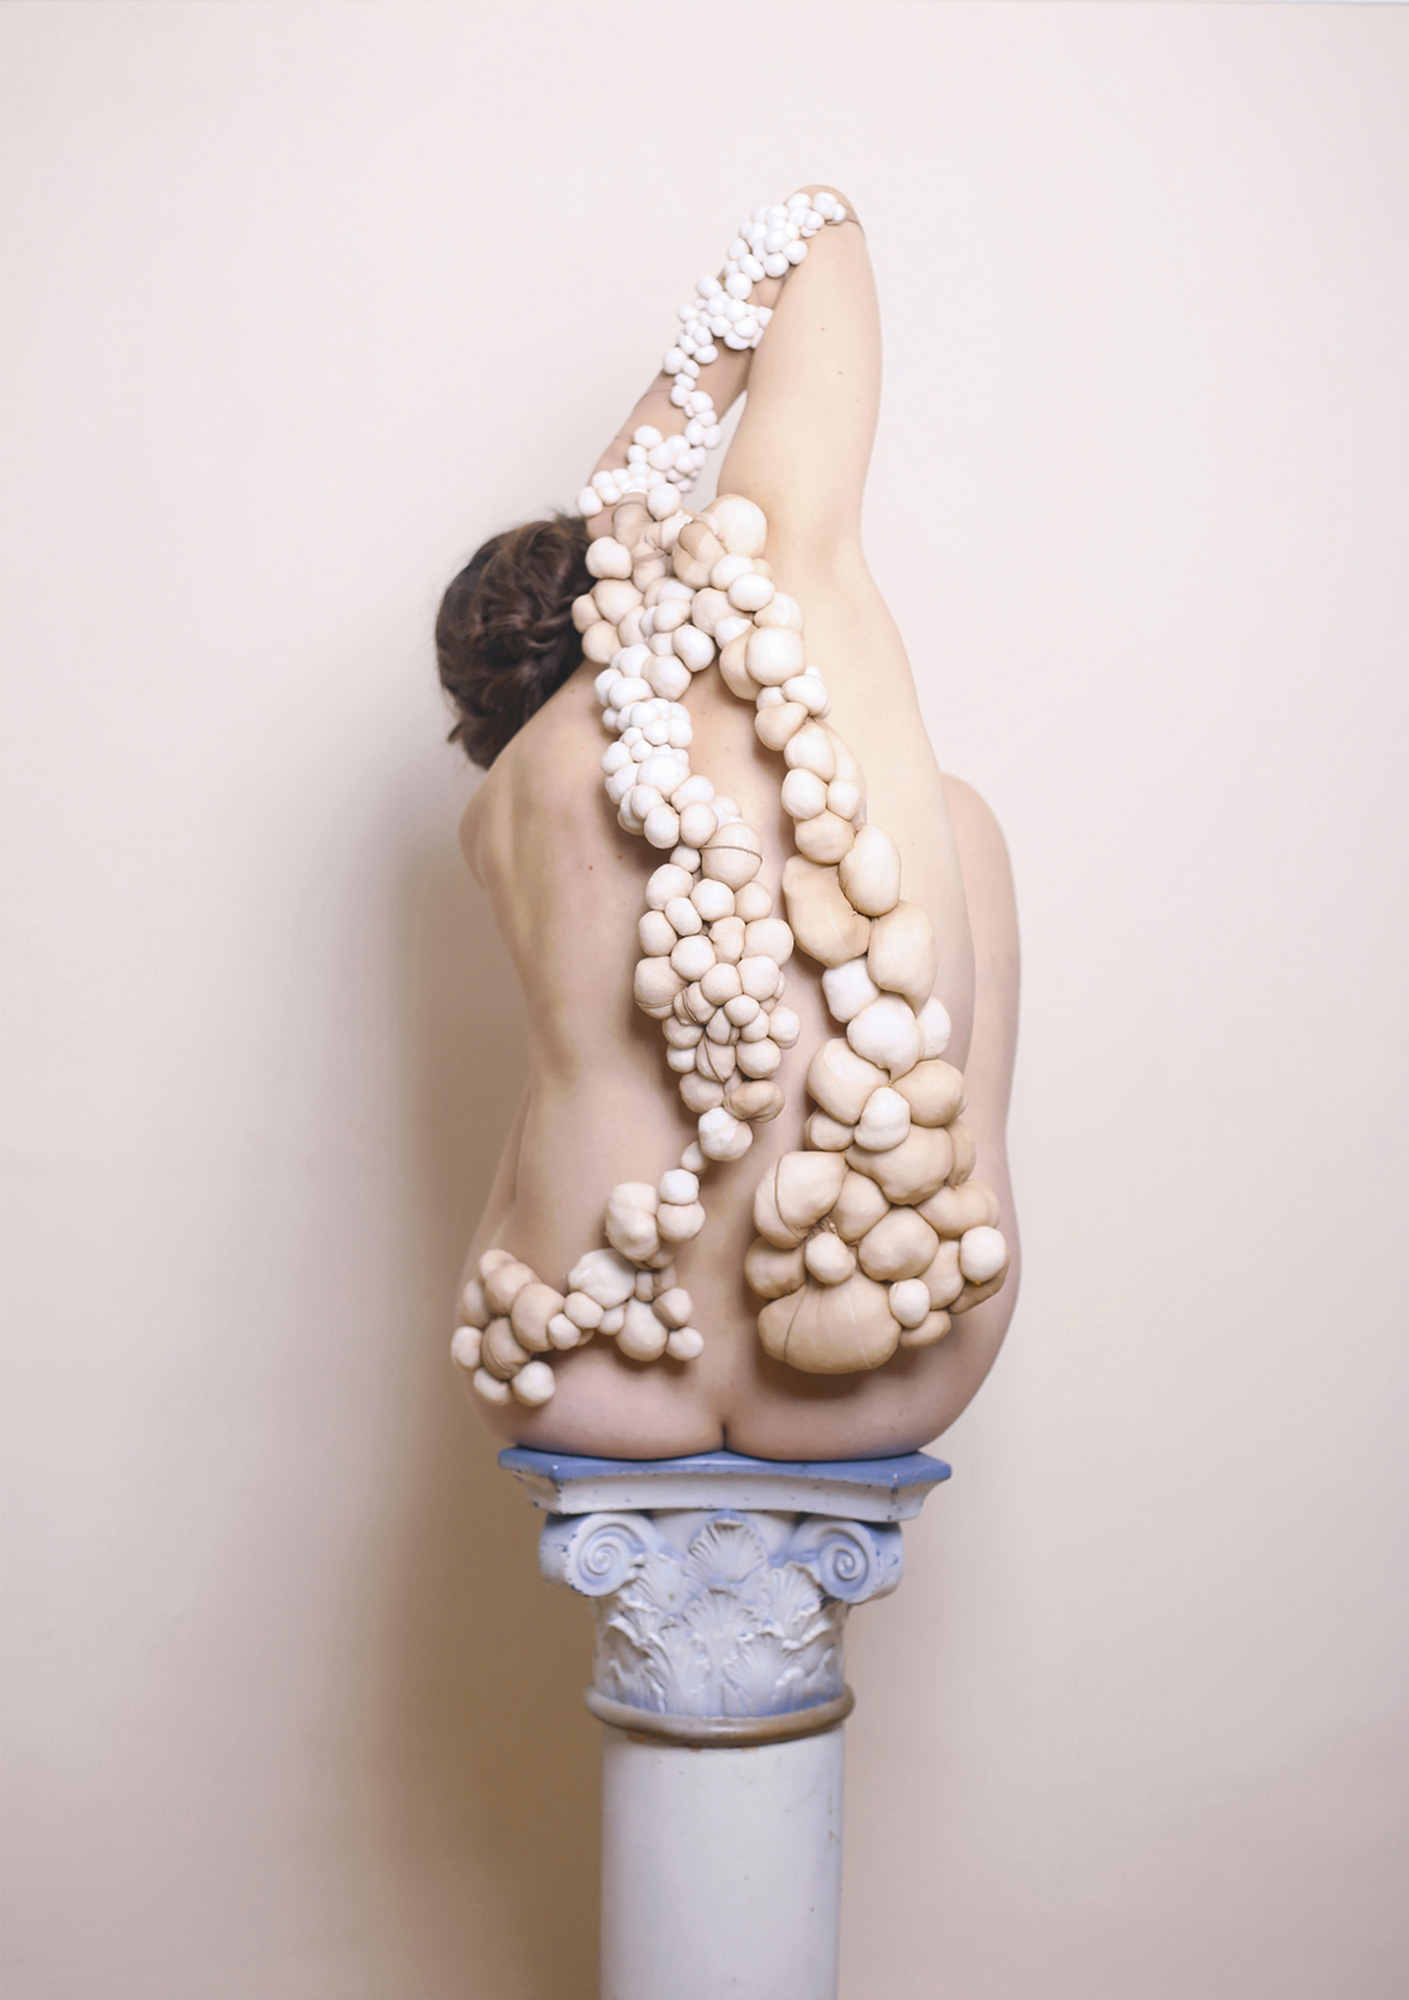 A naked figure is covered in round material objects.